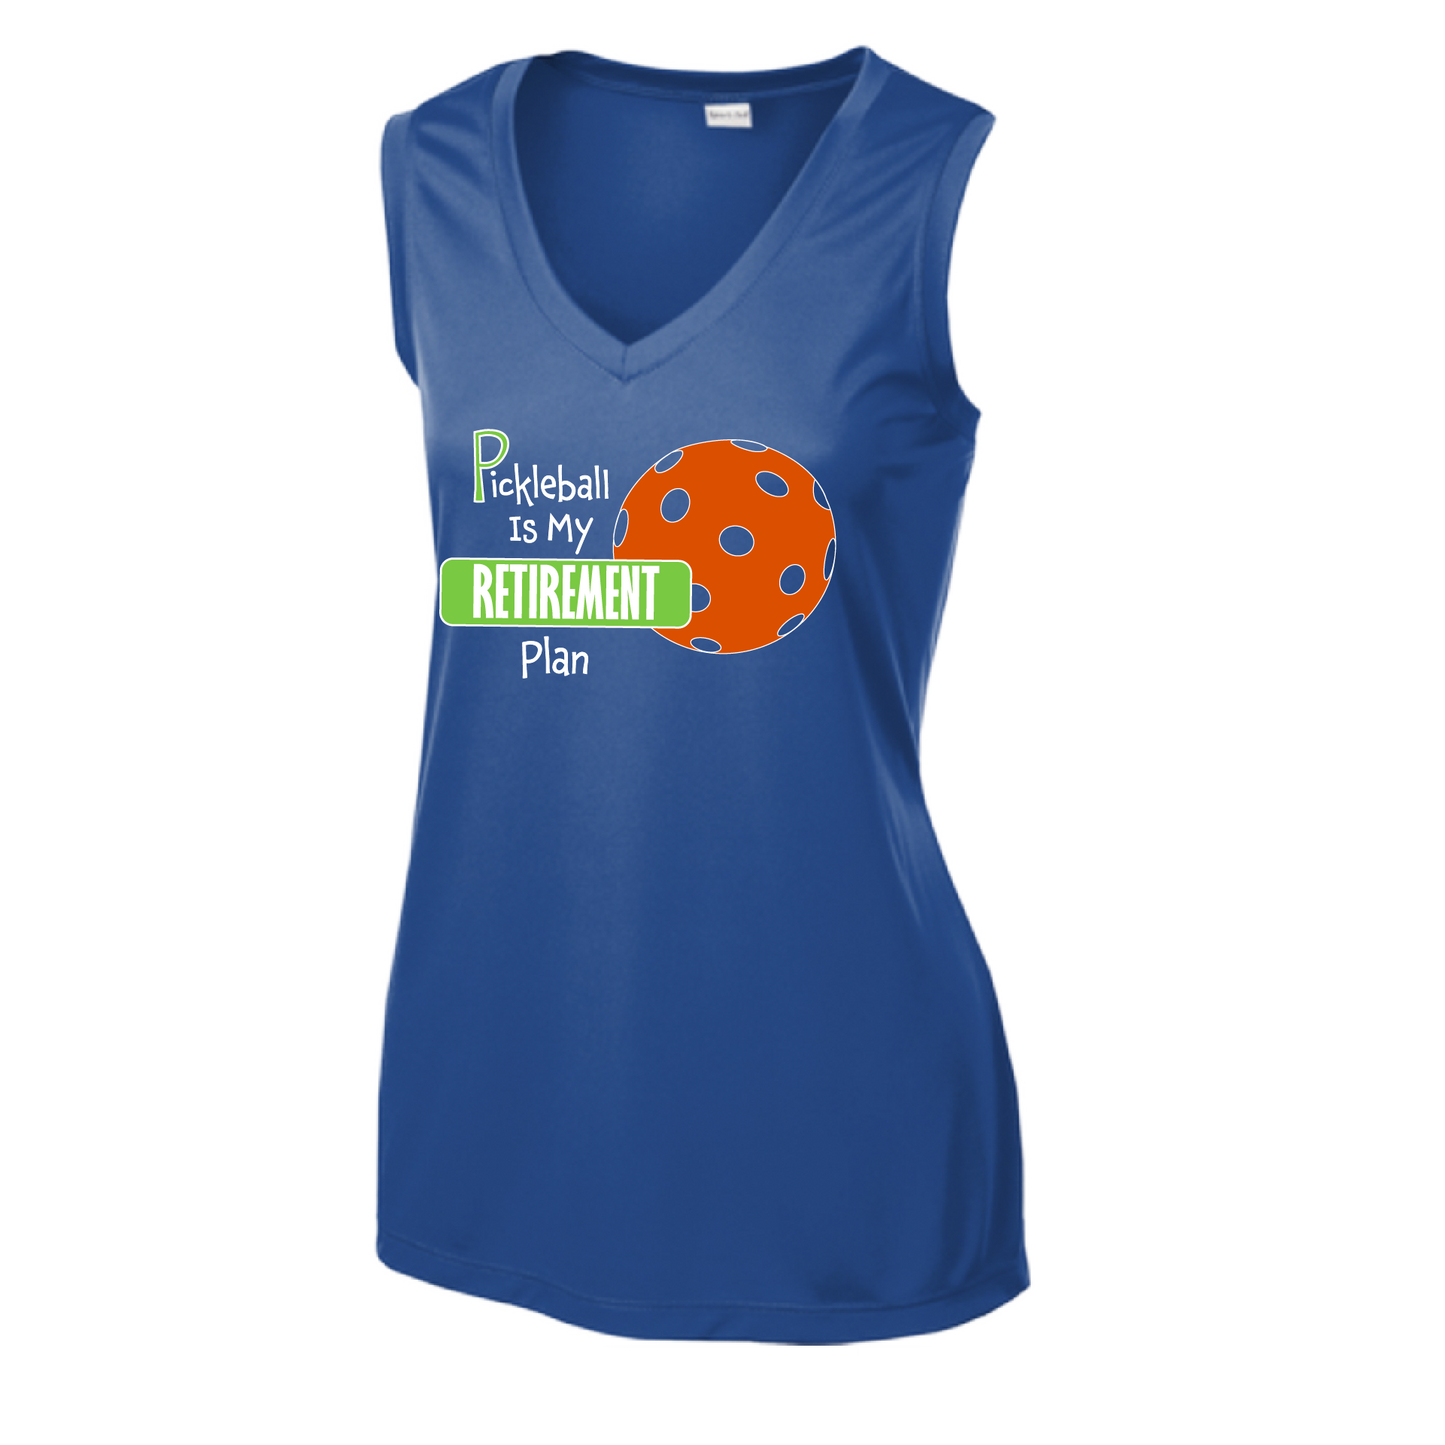 Pickleball Design: Pickleball is my Retirement plan  Women's Style: Sleeveless Tank  Turn up the volume in this Women's shirt with its perfect mix of softness and attitude. Material is ultra-comfortable with moisture wicking properties and tri-blend softness. PosiCharge technology locks in color. Highly breathable and lightweight.